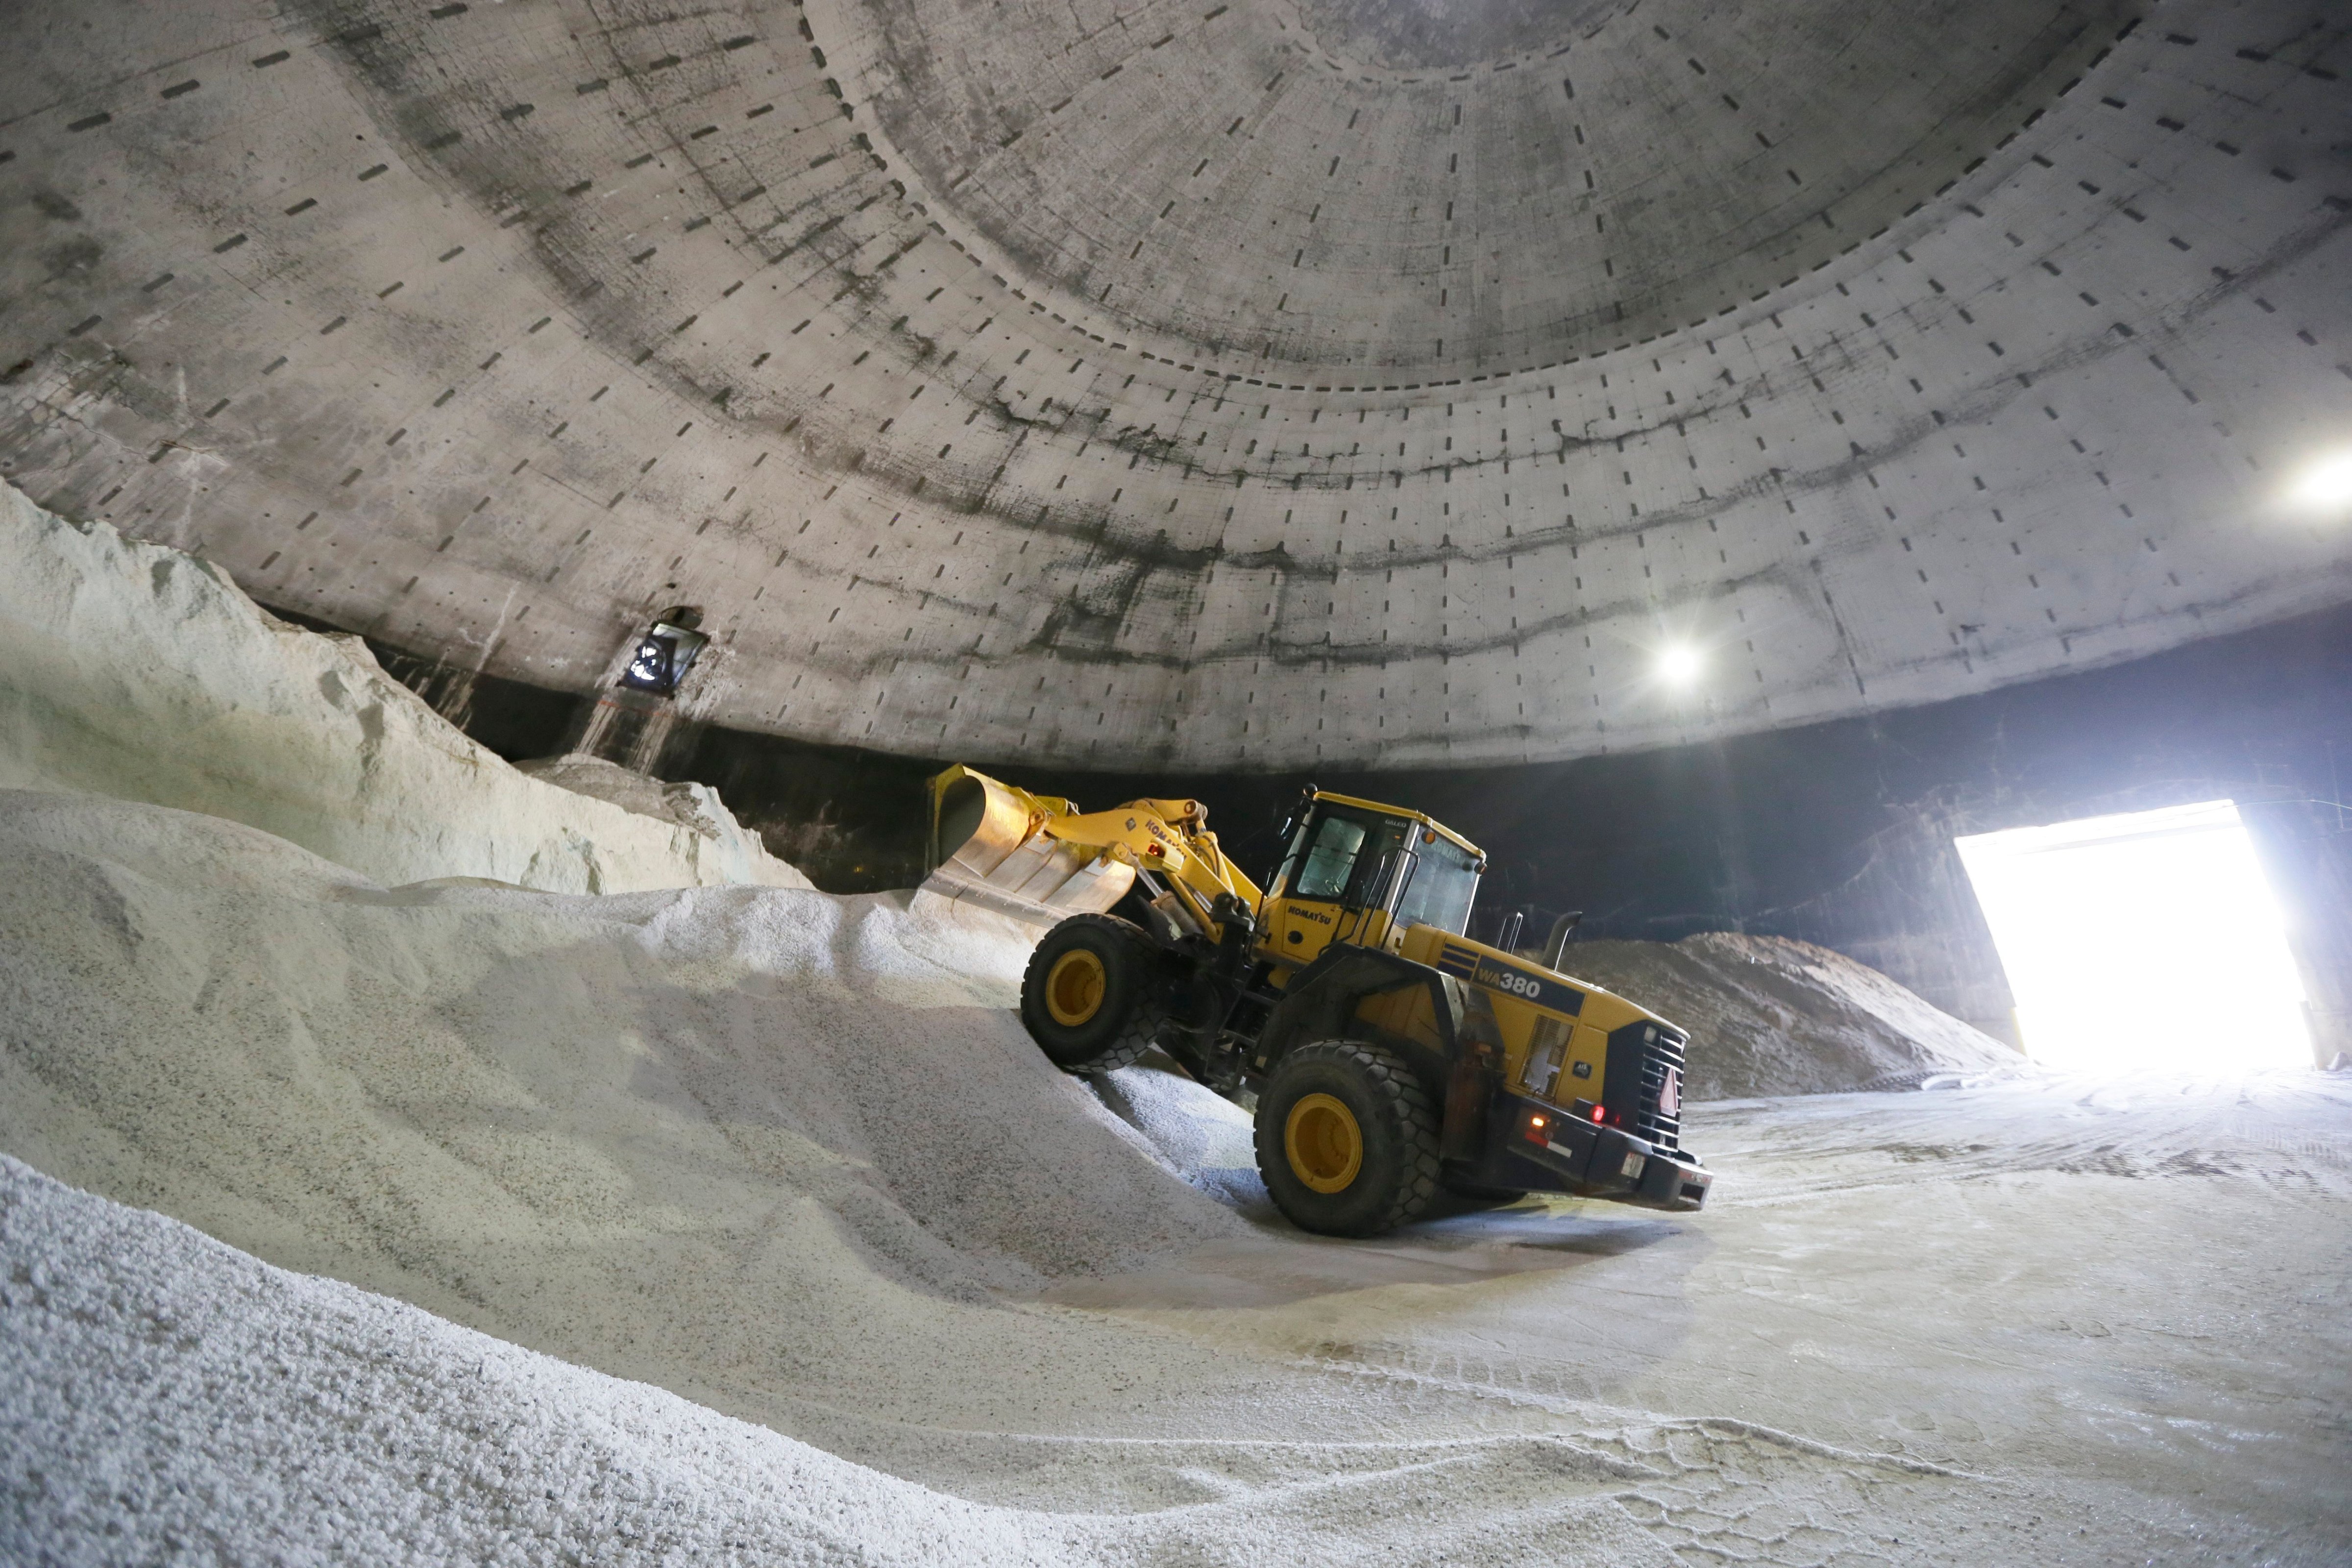 Salt is unloaded at the Scio Township, Mich. maintenance yard on Sept. 16, 2014. Some Midwest county road officials are facing price increases that are three times what they paid last year. (Carlos Osorio—AP)